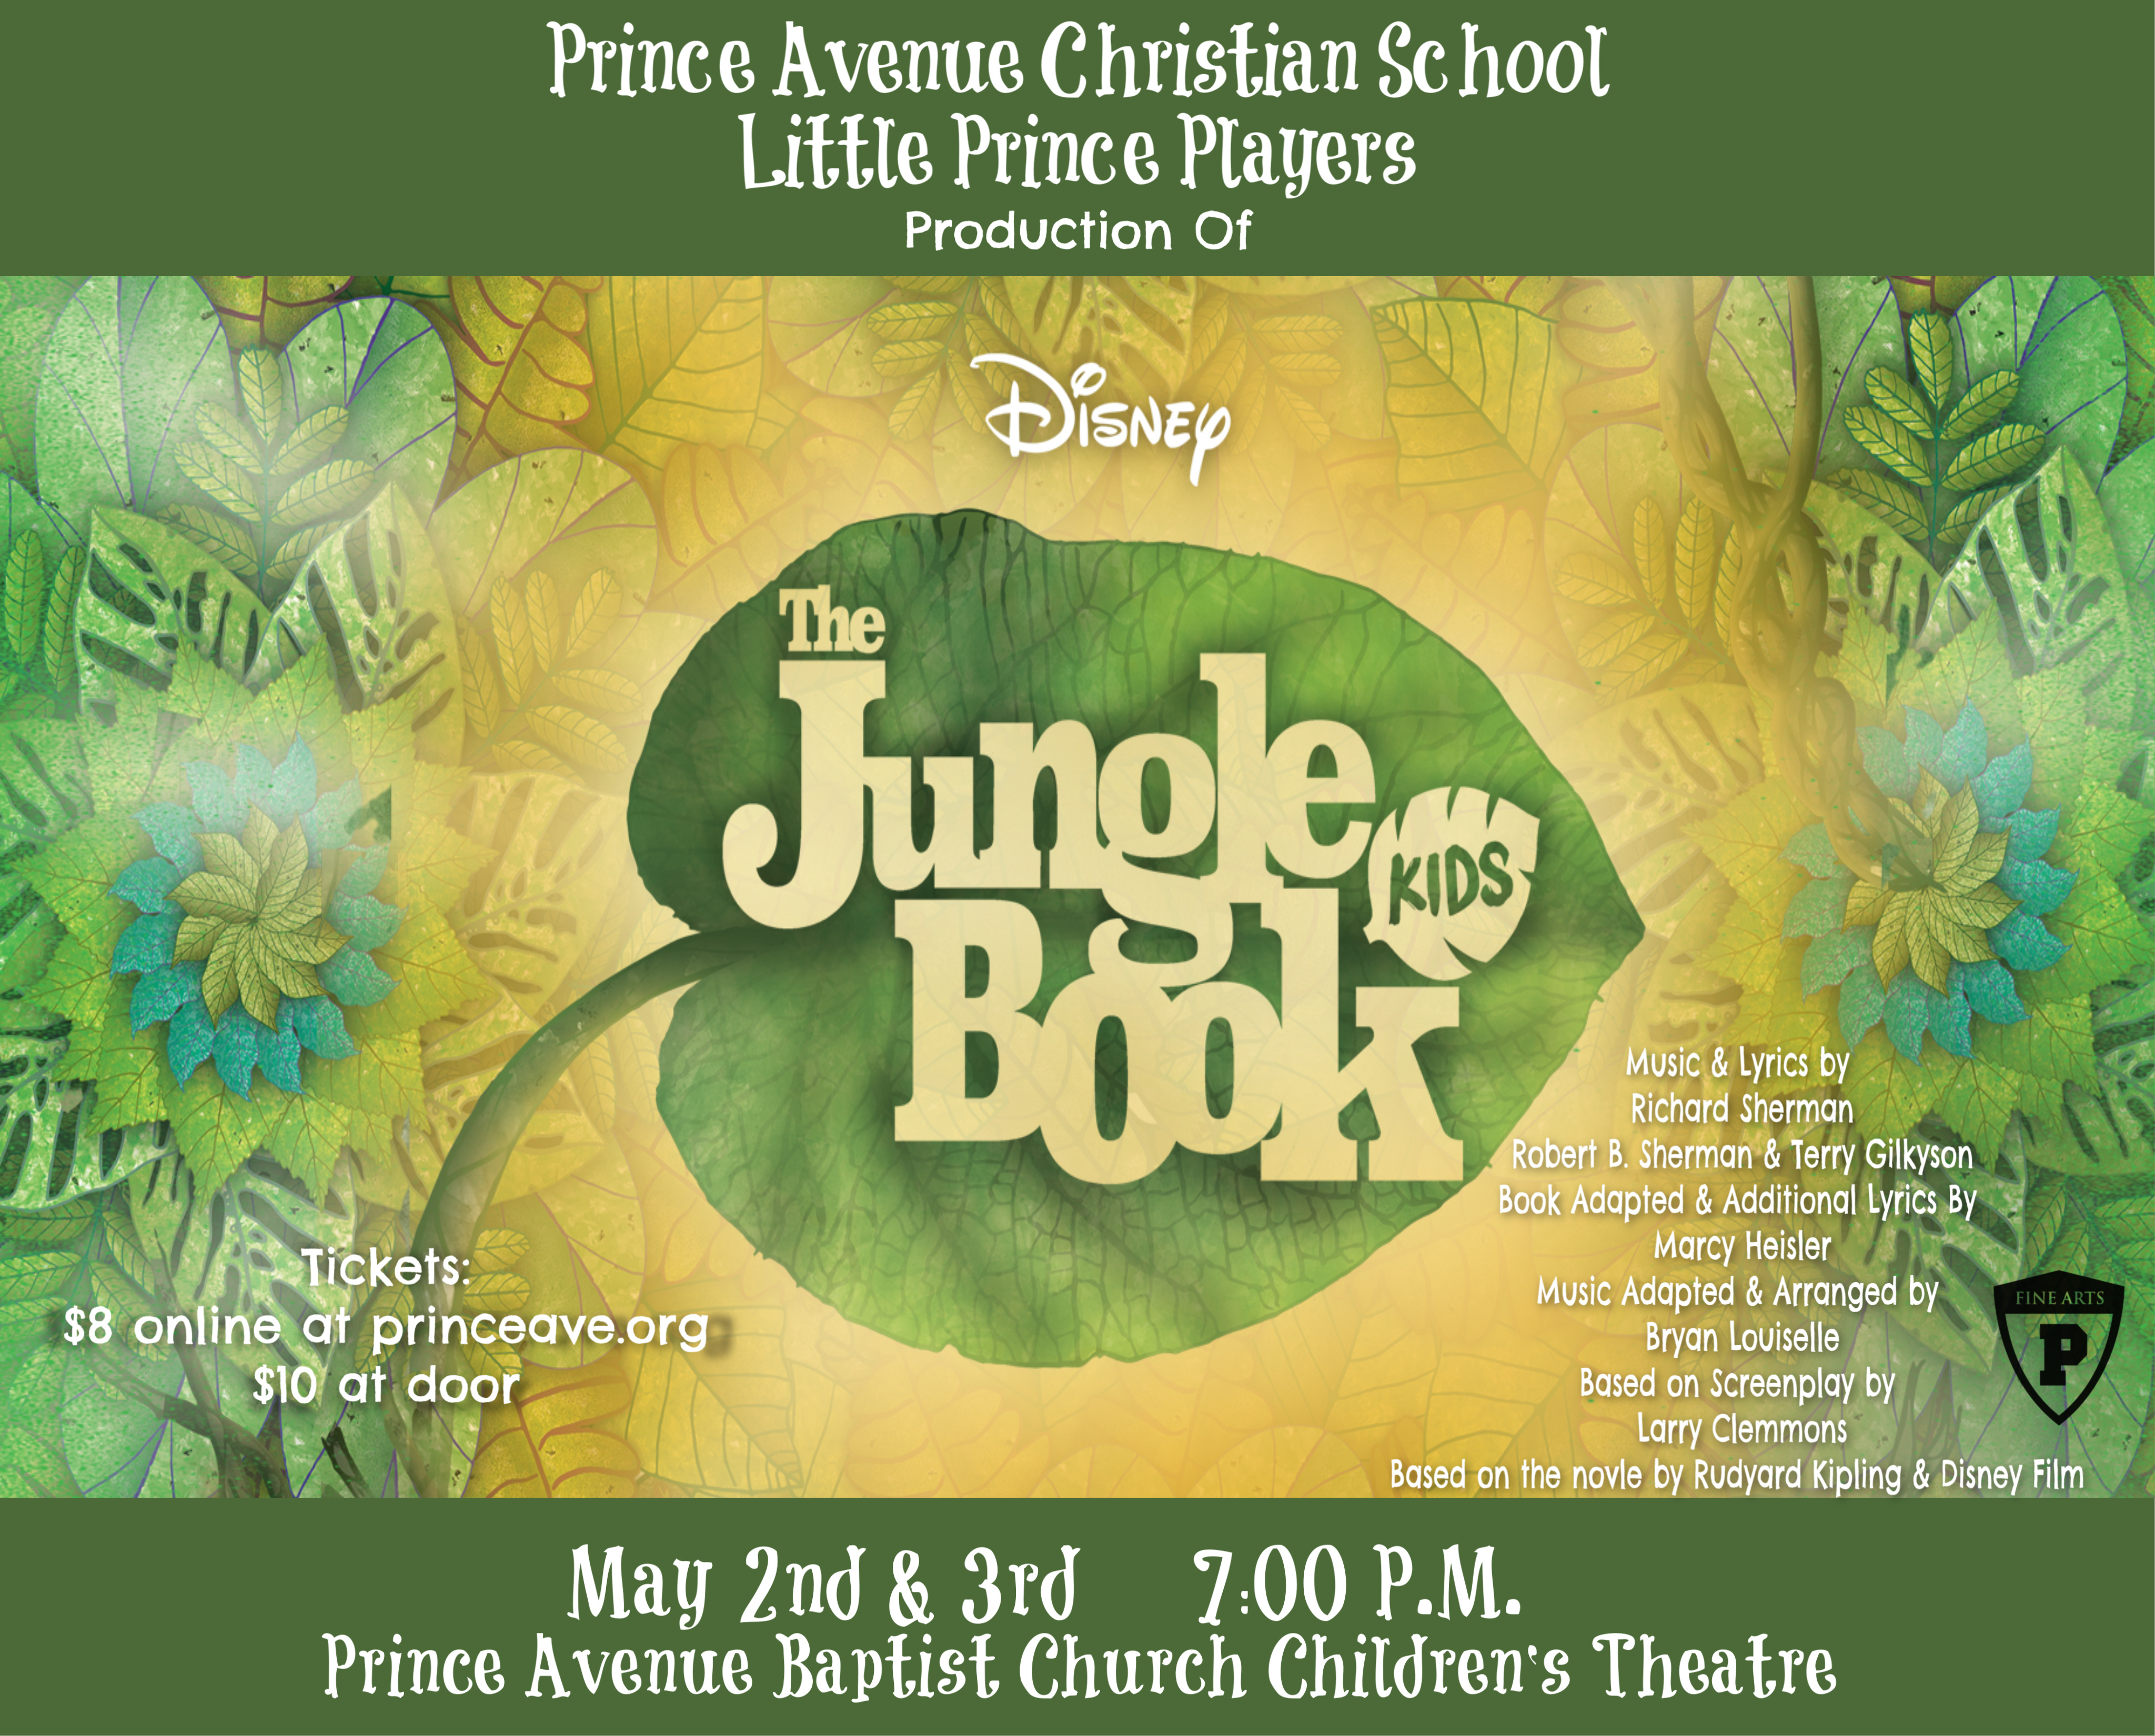 Tickets Available to Jungle Book Kids - Prince Avenue Christian School